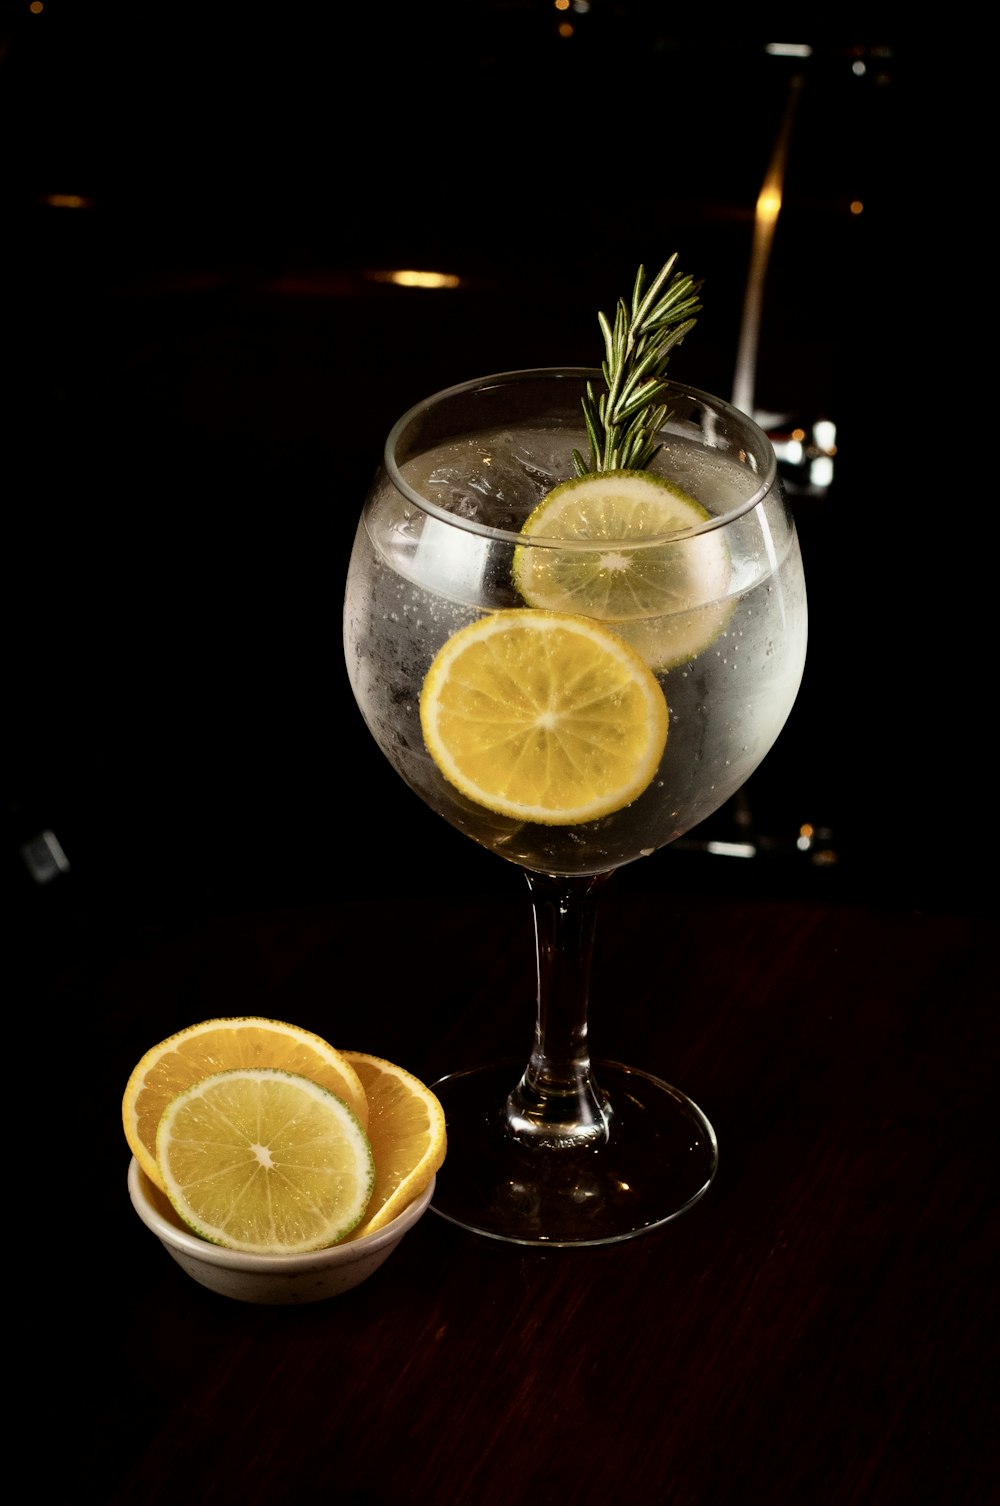 a glass of wine with lemons and a rosemary sprig